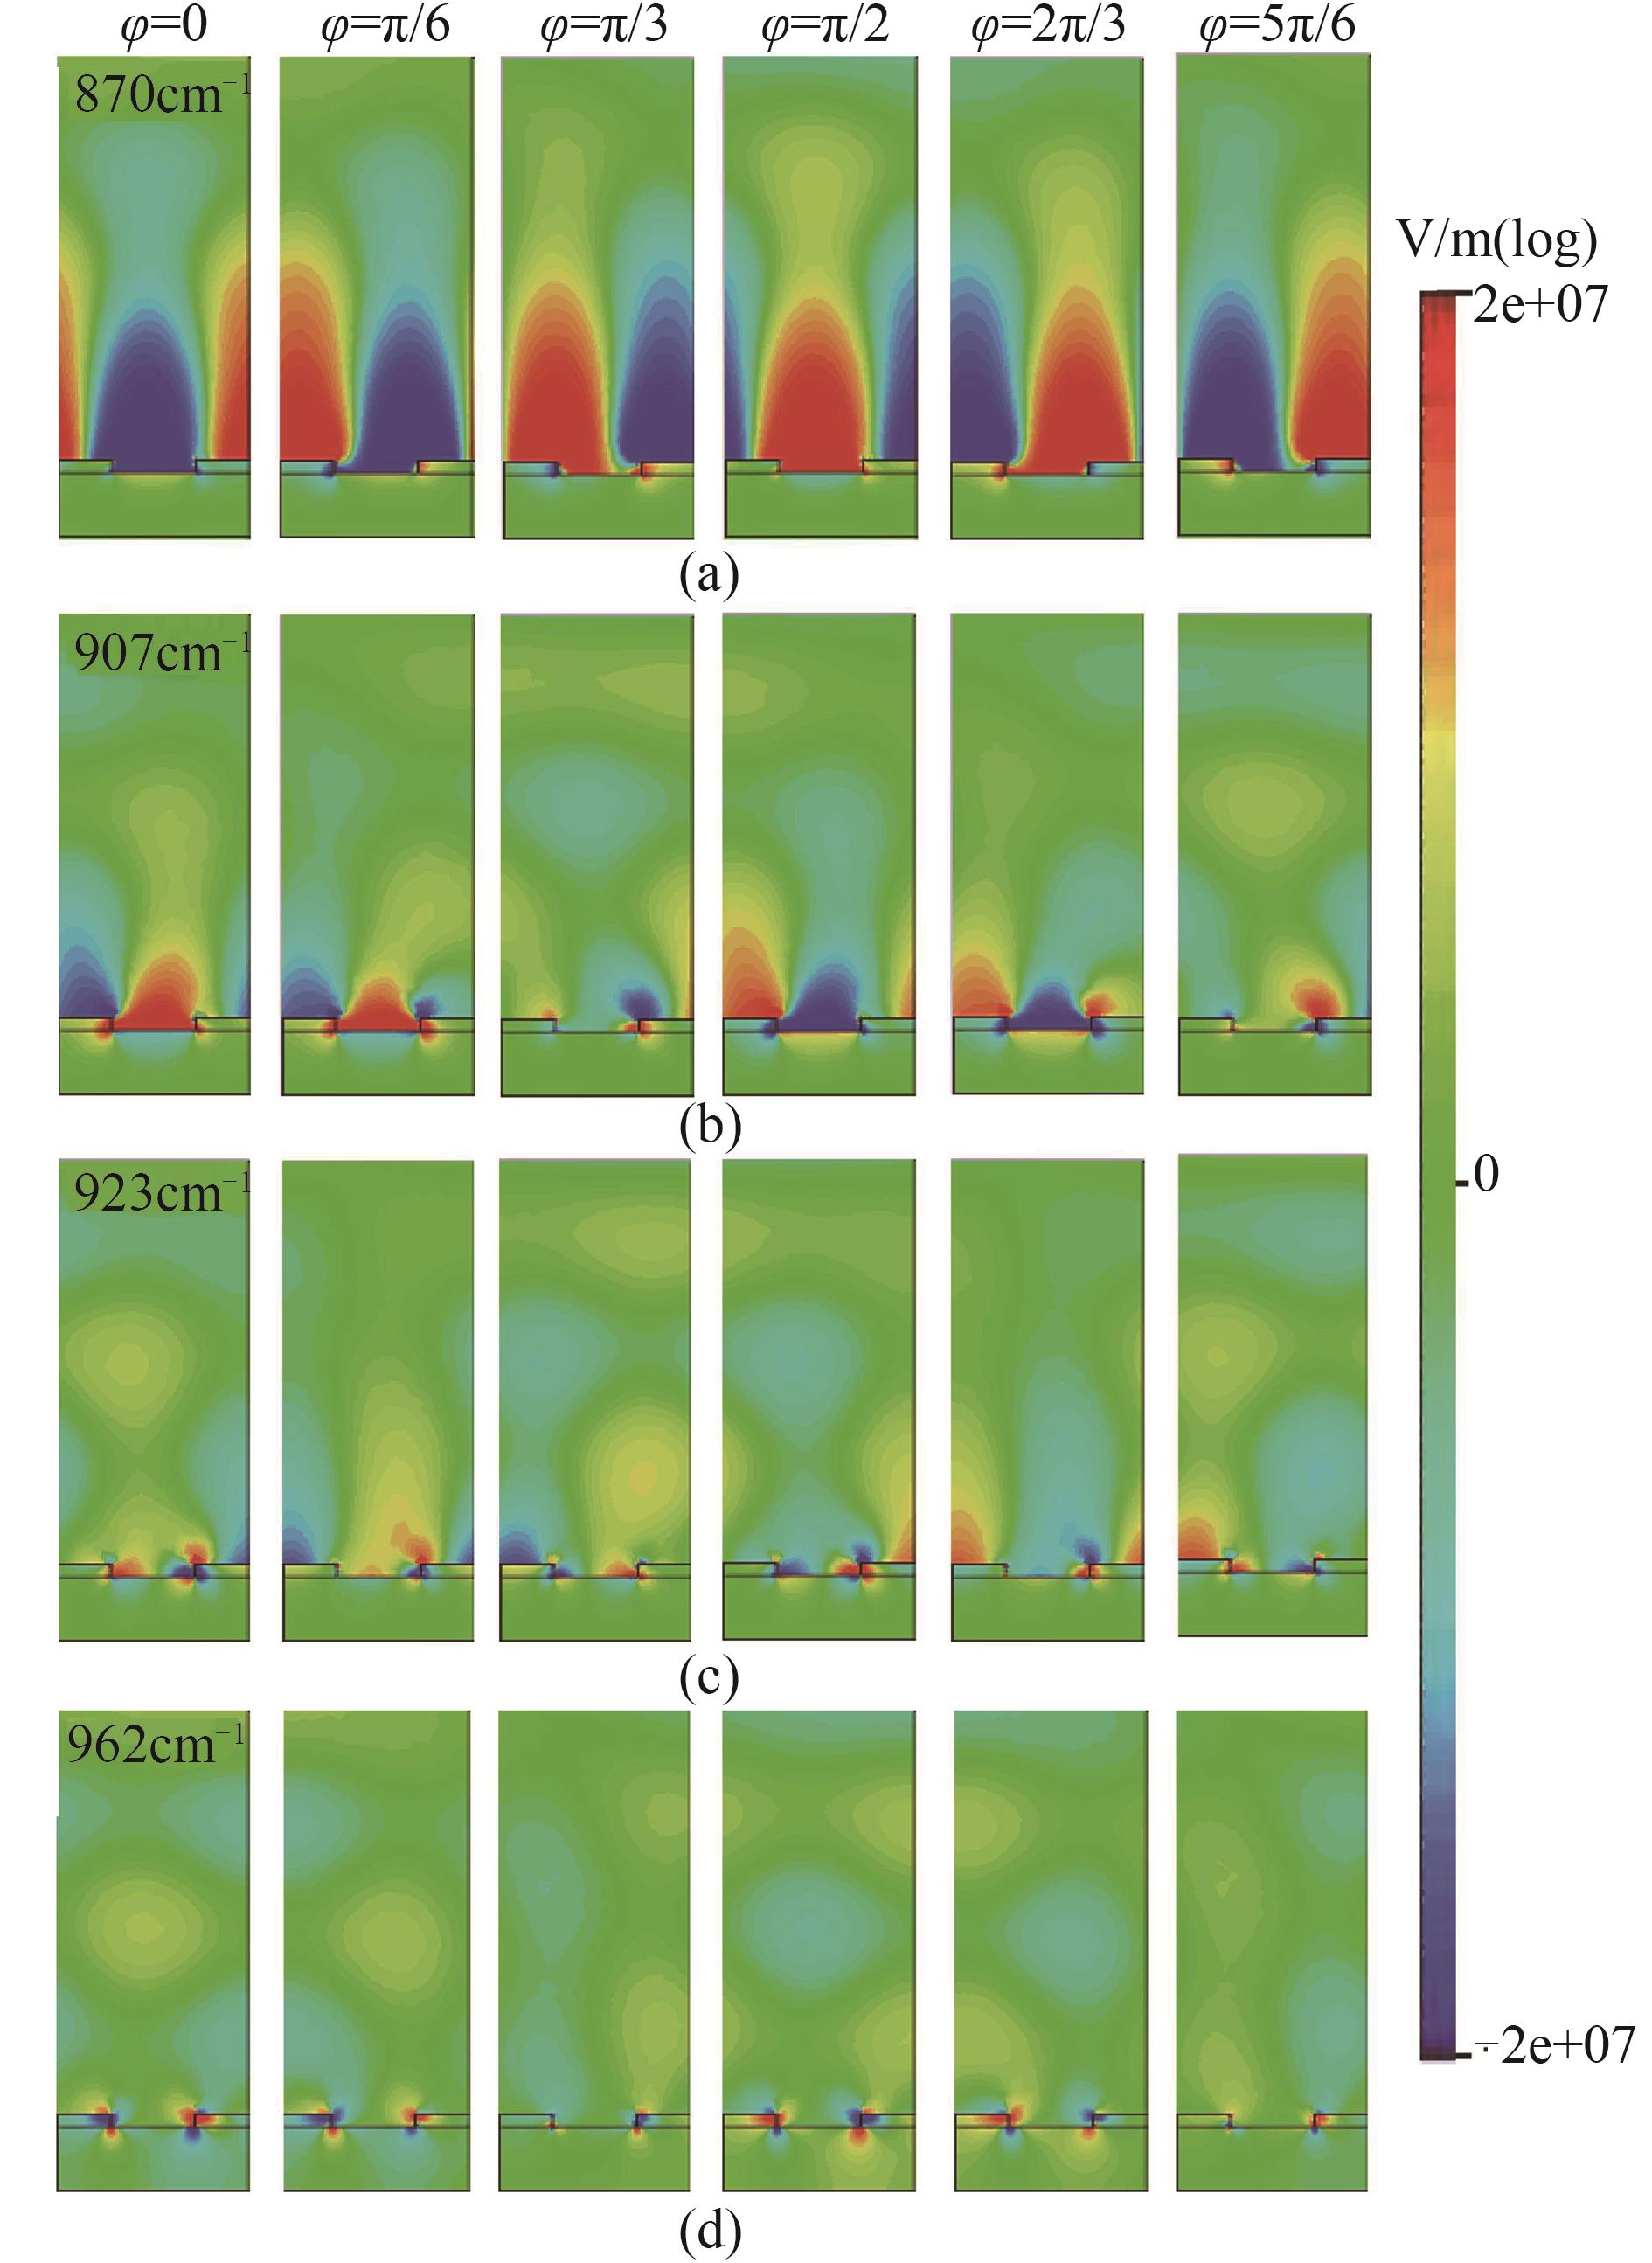 The evolution of electric-field distribution of the four optical modes